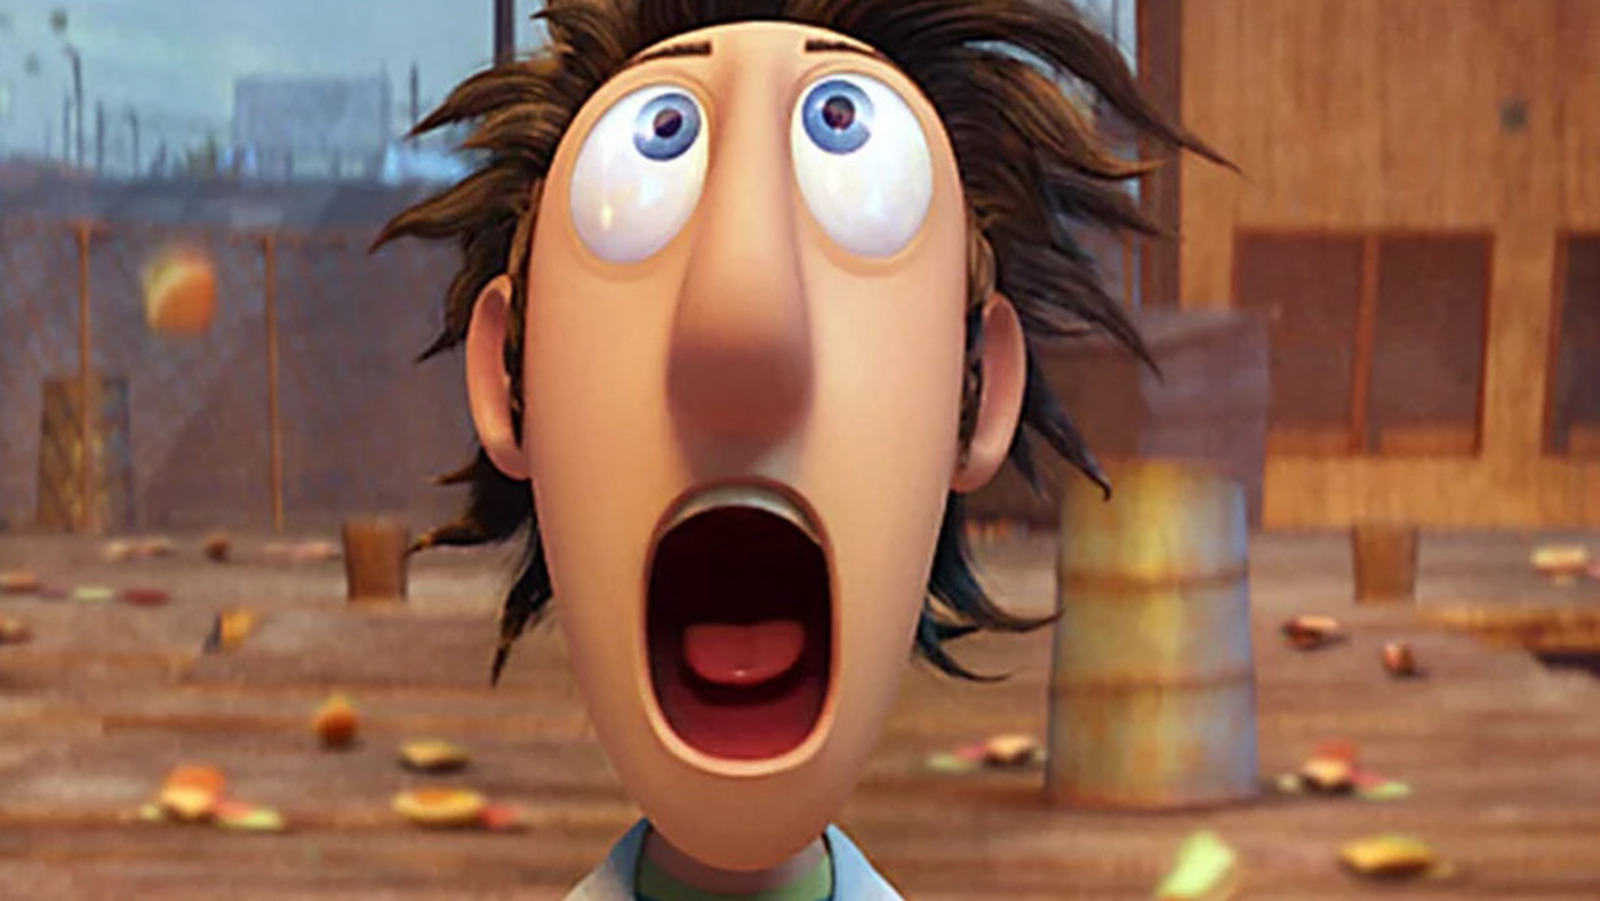 Things Only Adults Notice In Cloudy With A Chance Of Meatballs